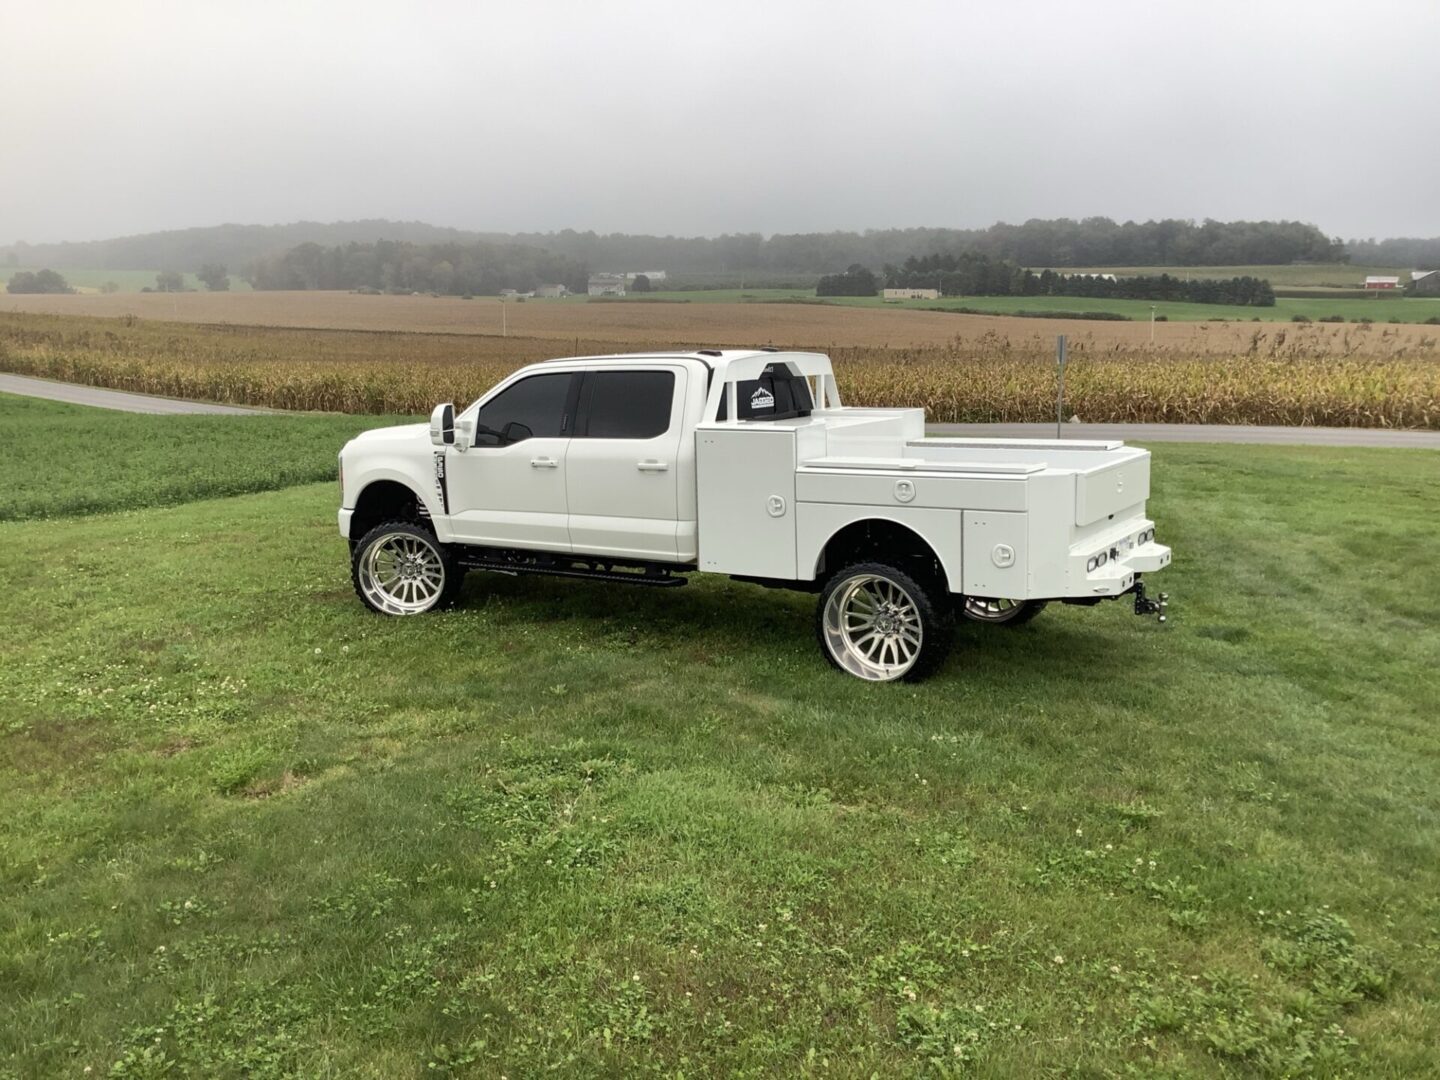 A white pickup truck with custom wheels parked on a grassy knoll near a farm field on an overcast day.